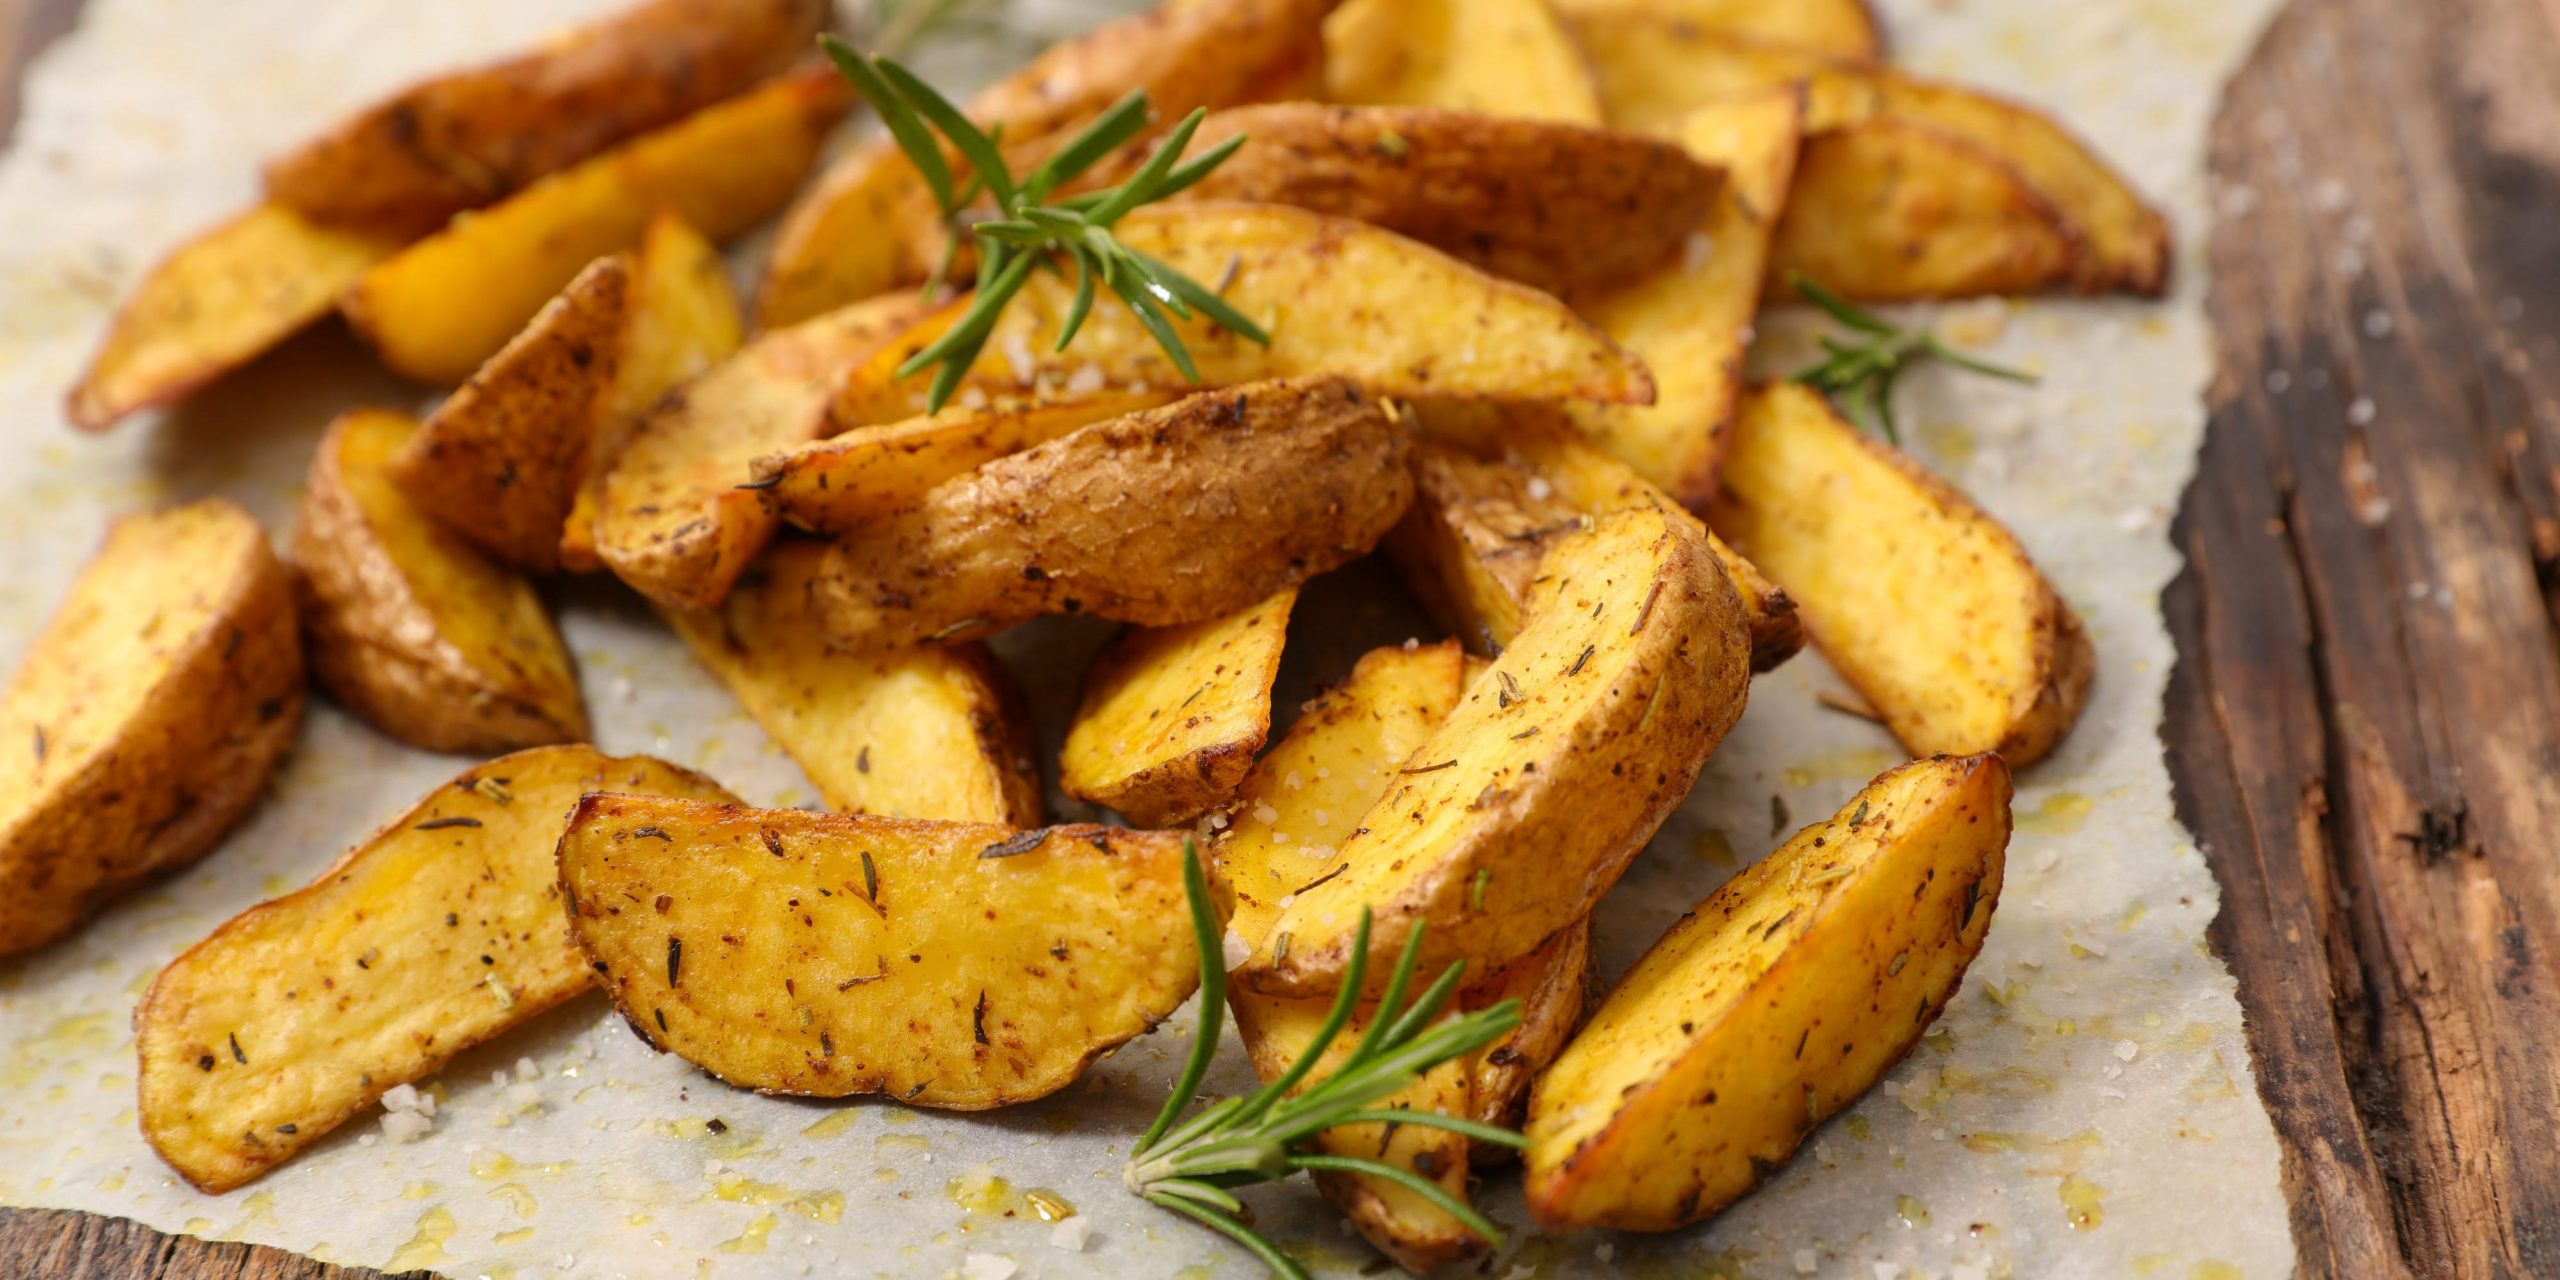 baked potato wedges arranged on a piece of wax paper with springs of rosemary